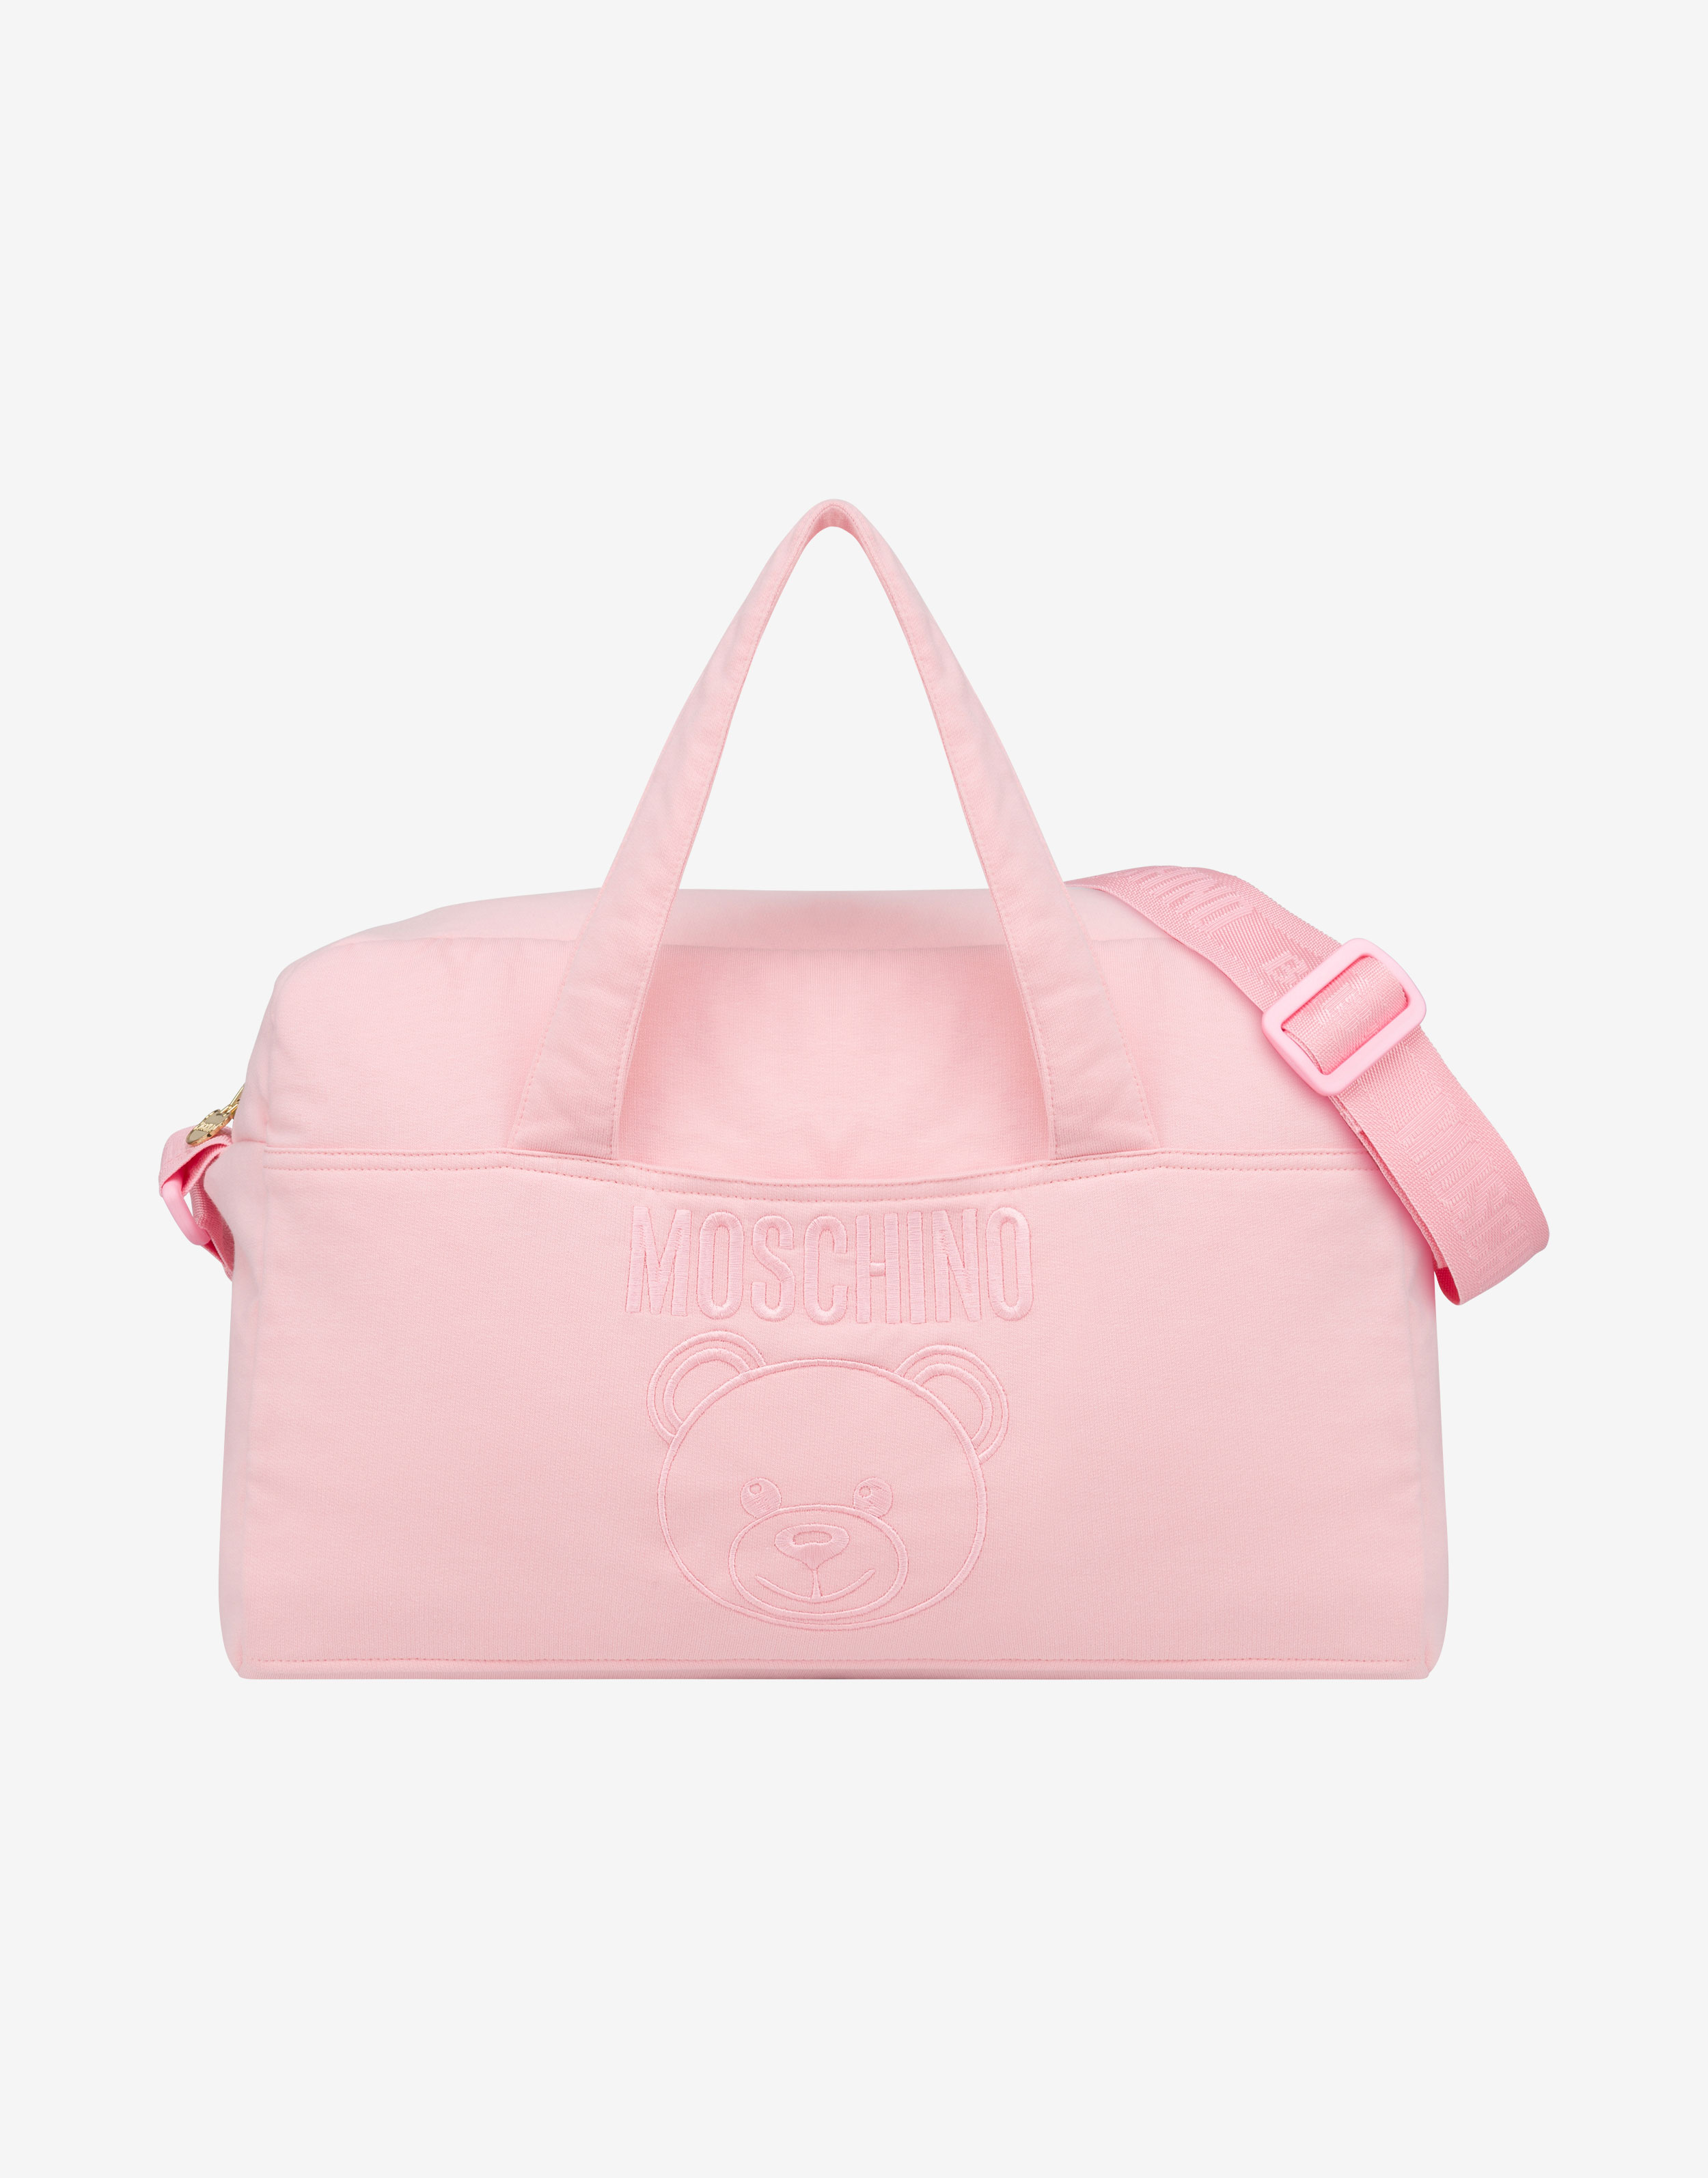 Moschino ベビー用品 for キッズ - Official Store